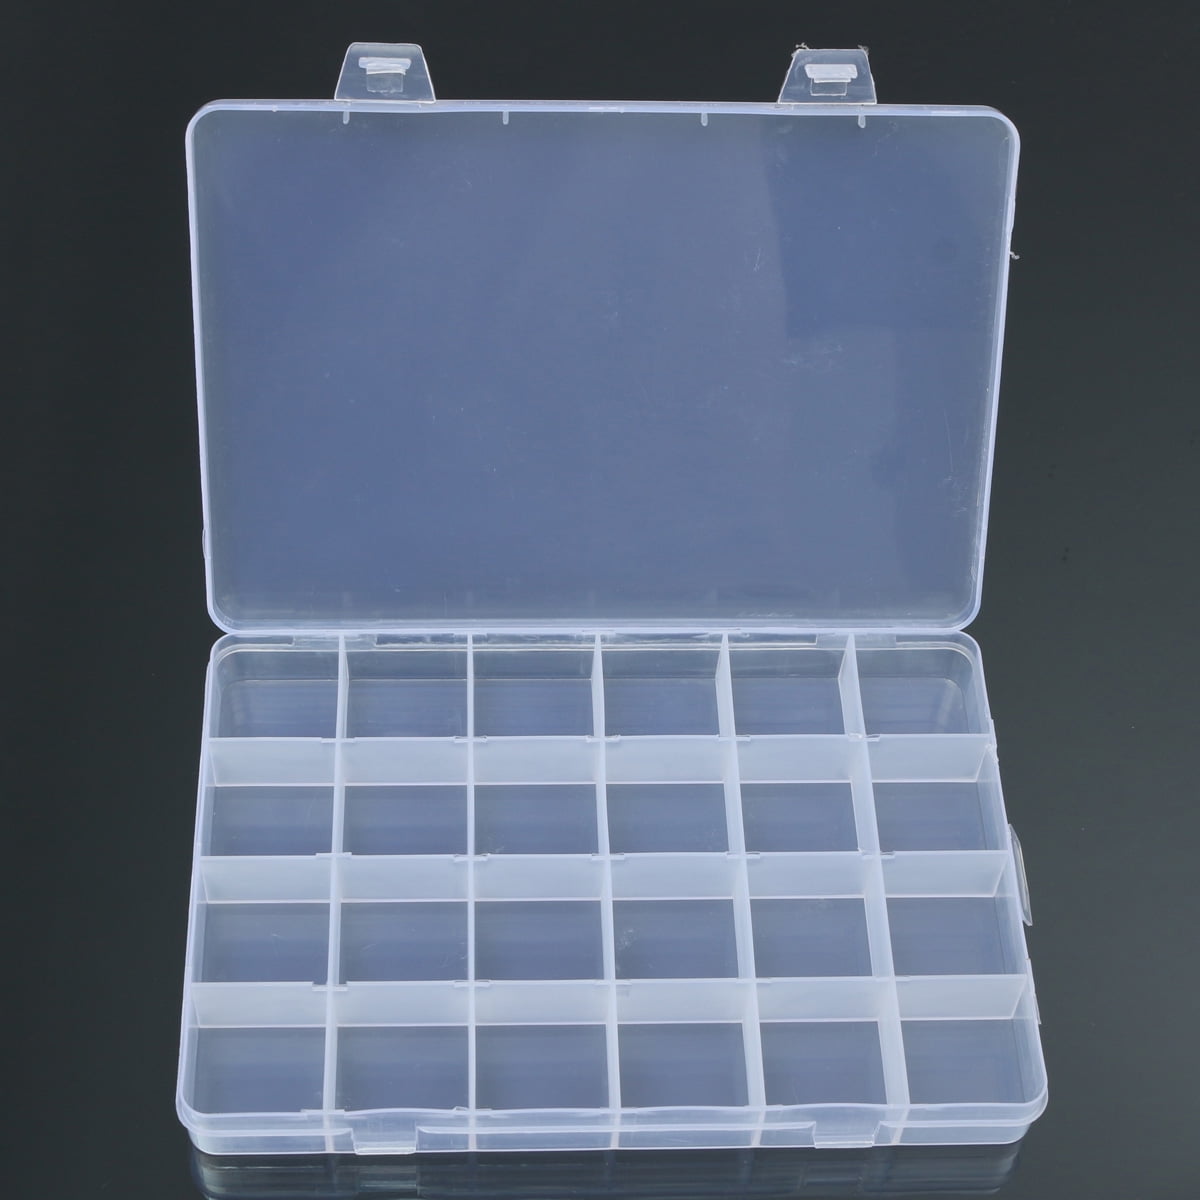 24 Compartment Slot Storage Box Practical Adjustable Plastic Case For Bead W2B3 